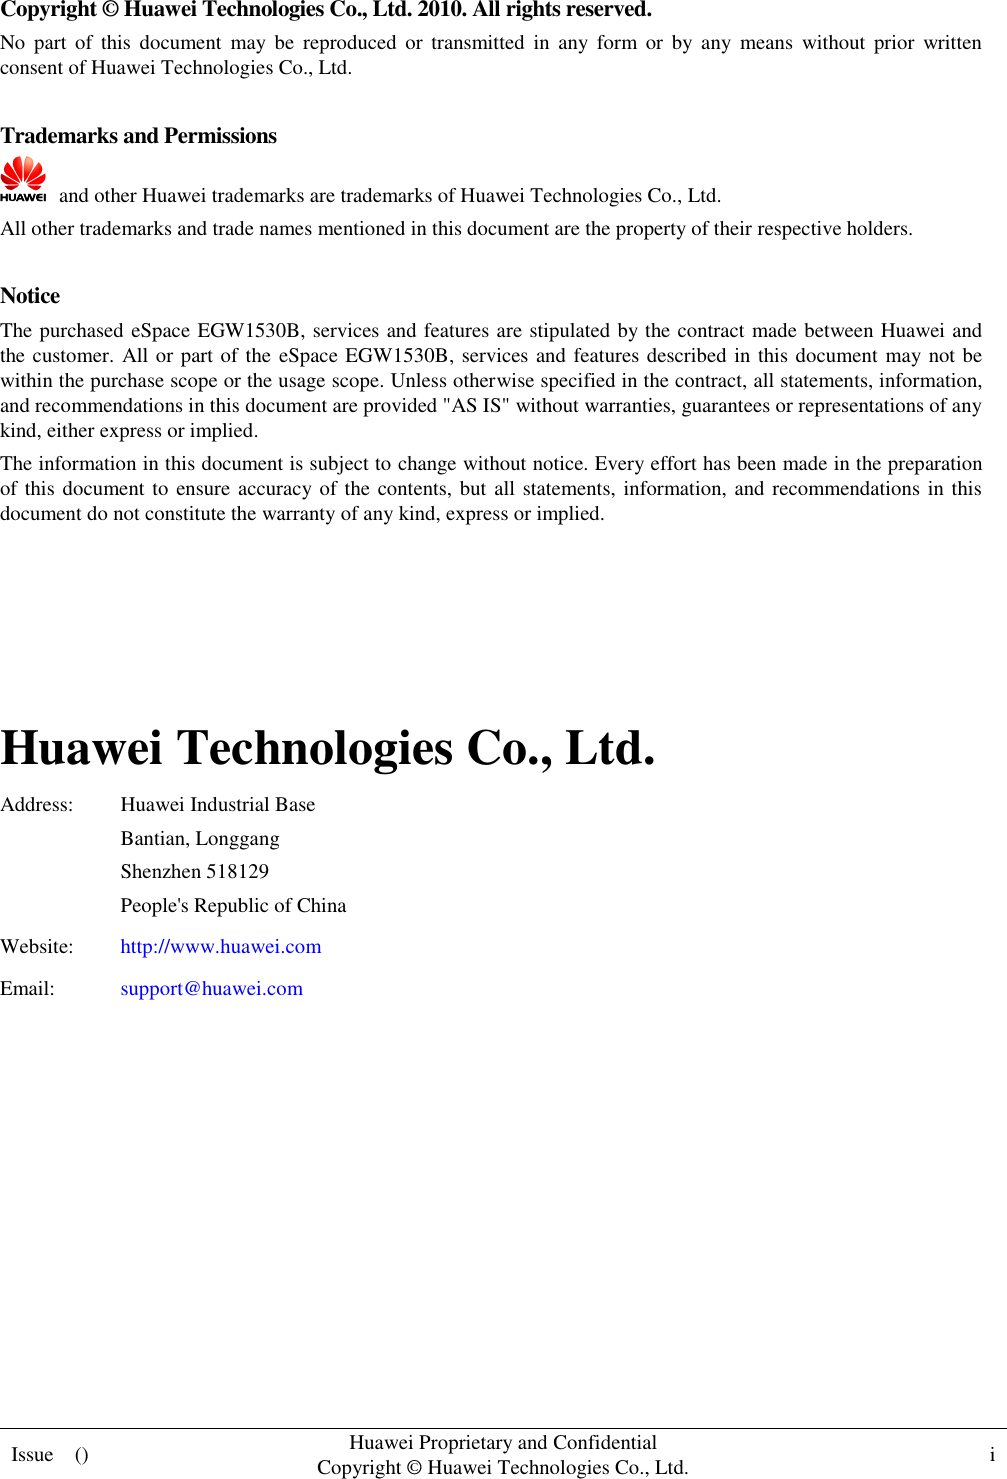  Issue    () Huawei Proprietary and Confidential                                     Copyright © Huawei Technologies Co., Ltd. i    Copyright © Huawei Technologies Co., Ltd. 2010. All rights reserved. No  part  of  this  document  may  be  reproduced  or  transmitted  in  any  form  or  by  any  means  without  prior  written consent of Huawei Technologies Co., Ltd.  Trademarks and Permissions   and other Huawei trademarks are trademarks of Huawei Technologies Co., Ltd. All other trademarks and trade names mentioned in this document are the property of their respective holders.  Notice The purchased eSpace EGW1530B, services and features are stipulated by the contract made between Huawei and the customer. All or part of the eSpace EGW1530B, services and features described in this document may not be within the purchase scope or the usage scope. Unless otherwise specified in the contract, all statements, information, and recommendations in this document are provided &quot;AS IS&quot; without warranties, guarantees or representations of any kind, either express or implied. The information in this document is subject to change without notice. Every effort has been made in the preparation of this document to ensure accuracy of the contents, but all statements, information, and recommendations in this document do not constitute the warranty of any kind, express or implied.     Huawei Technologies Co., Ltd. Address: Huawei Industrial Base Bantian, Longgang Shenzhen 518129 People&apos;s Republic of China Website: http://www.huawei.com Email: support@huawei.com          